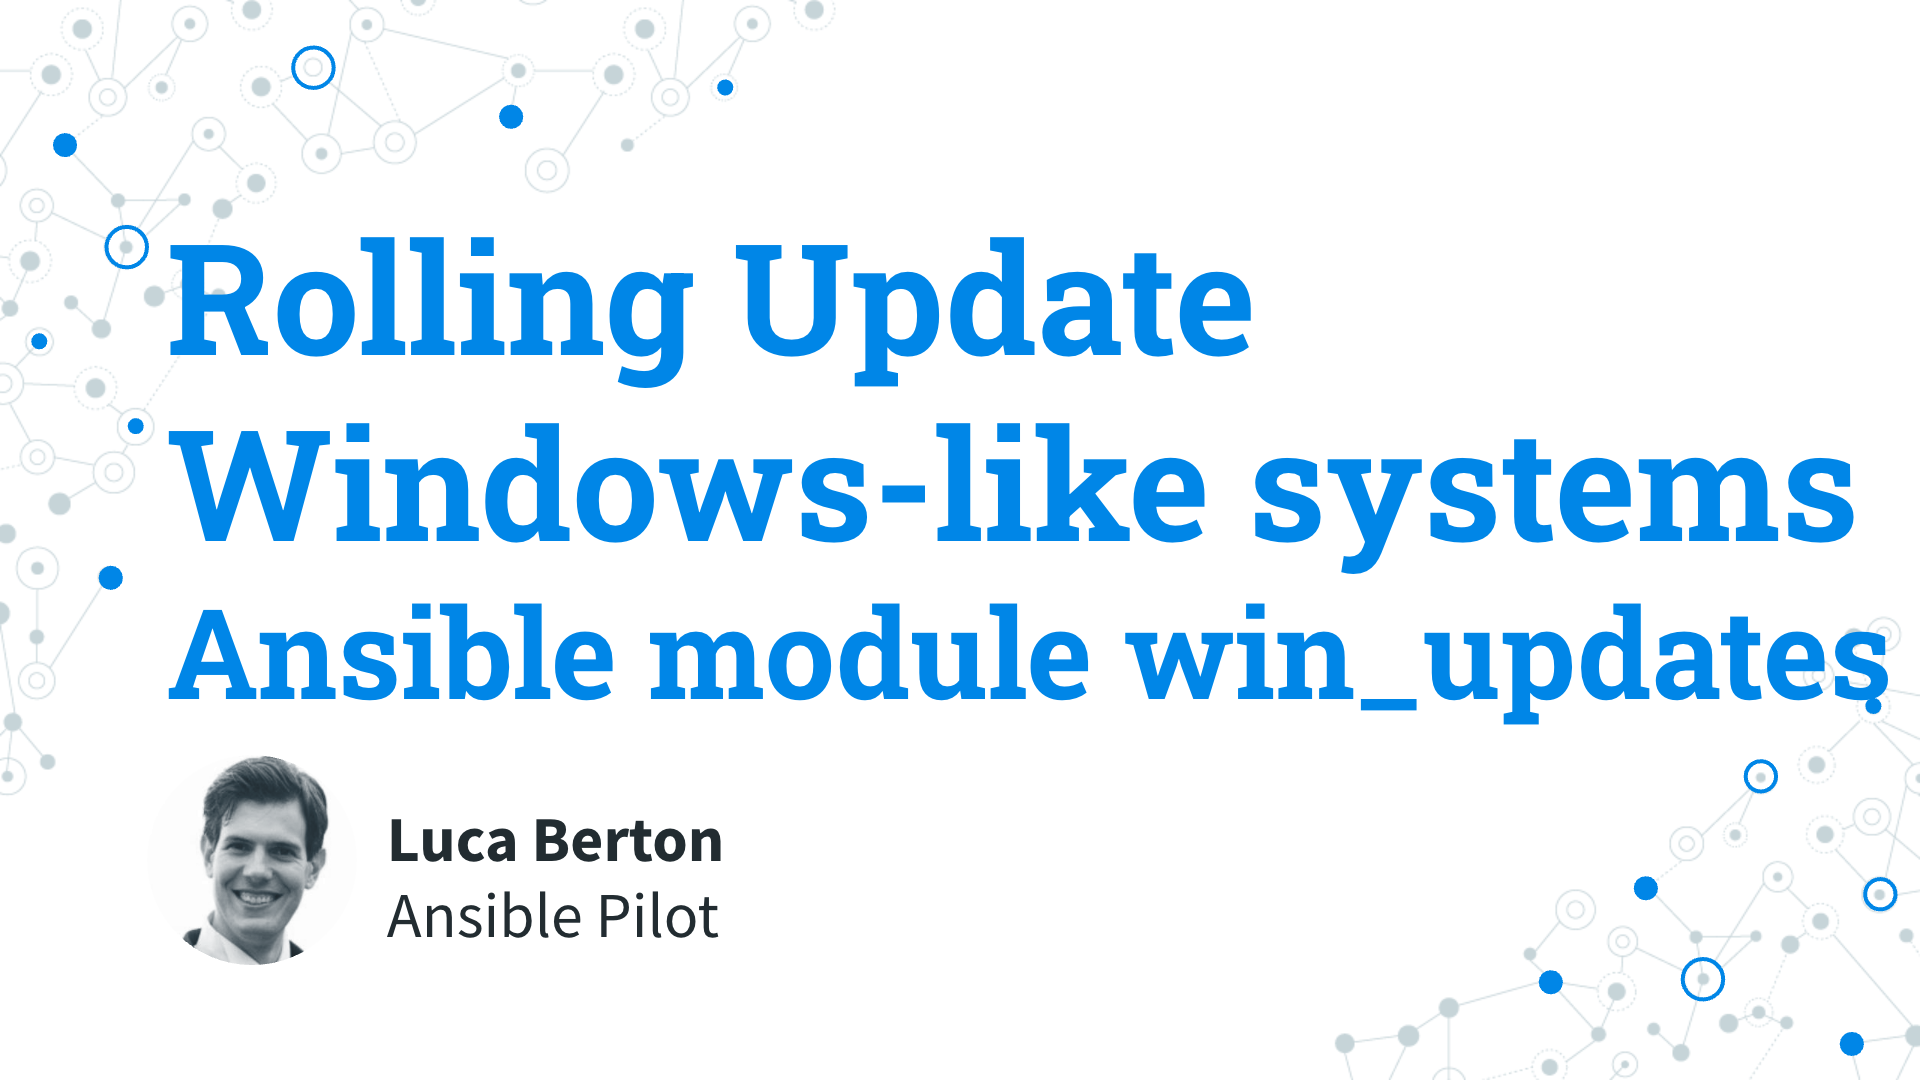 Rolling Update Windows-like systems - Ansible module win_updates